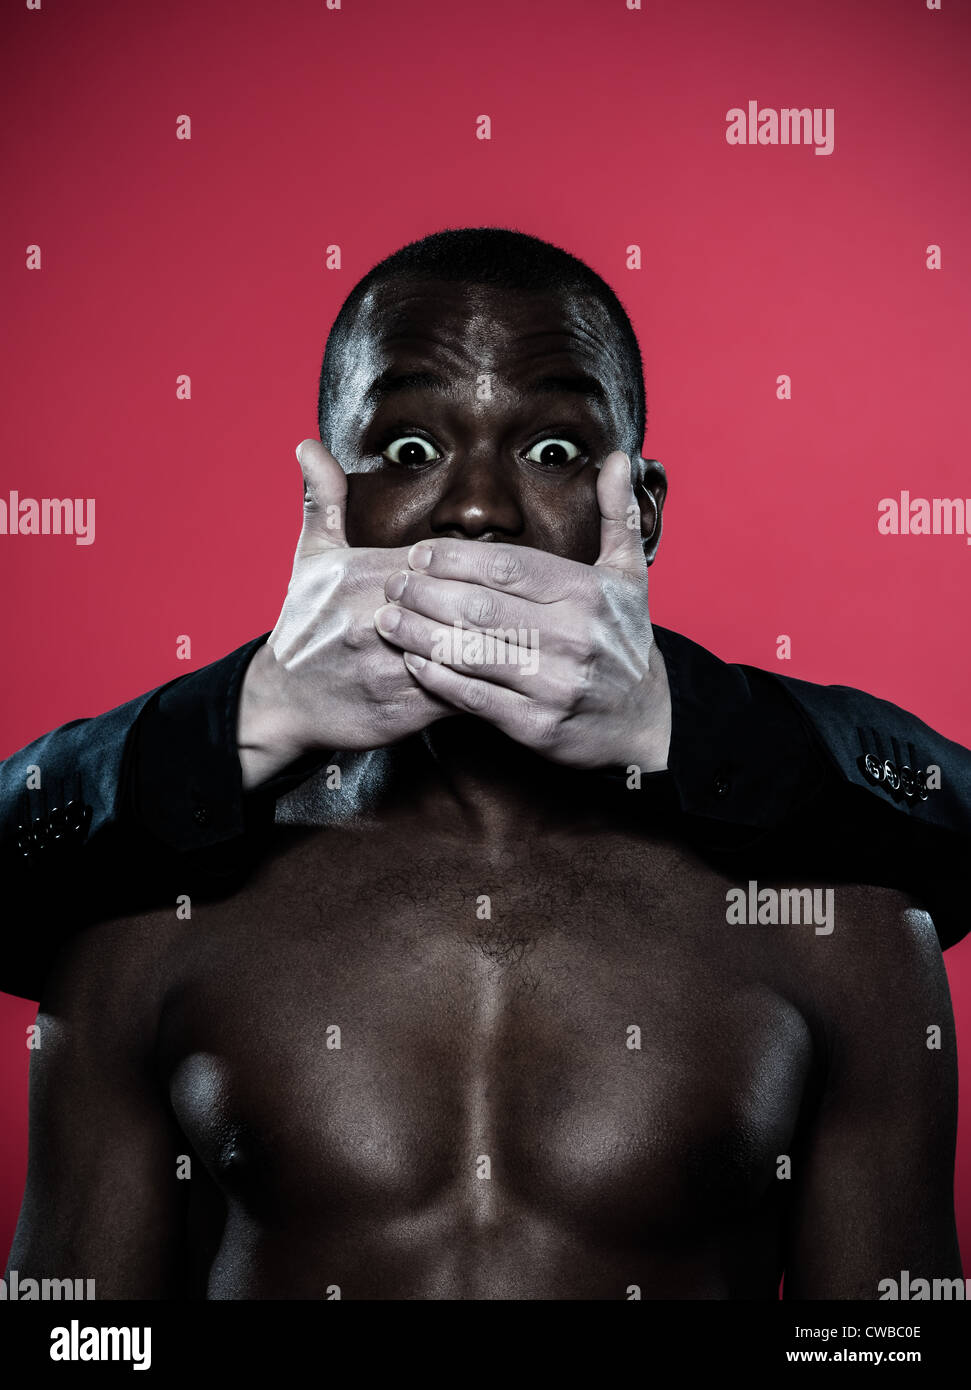 one african man hand on his mouth Freedom of speech concept Stock Photo